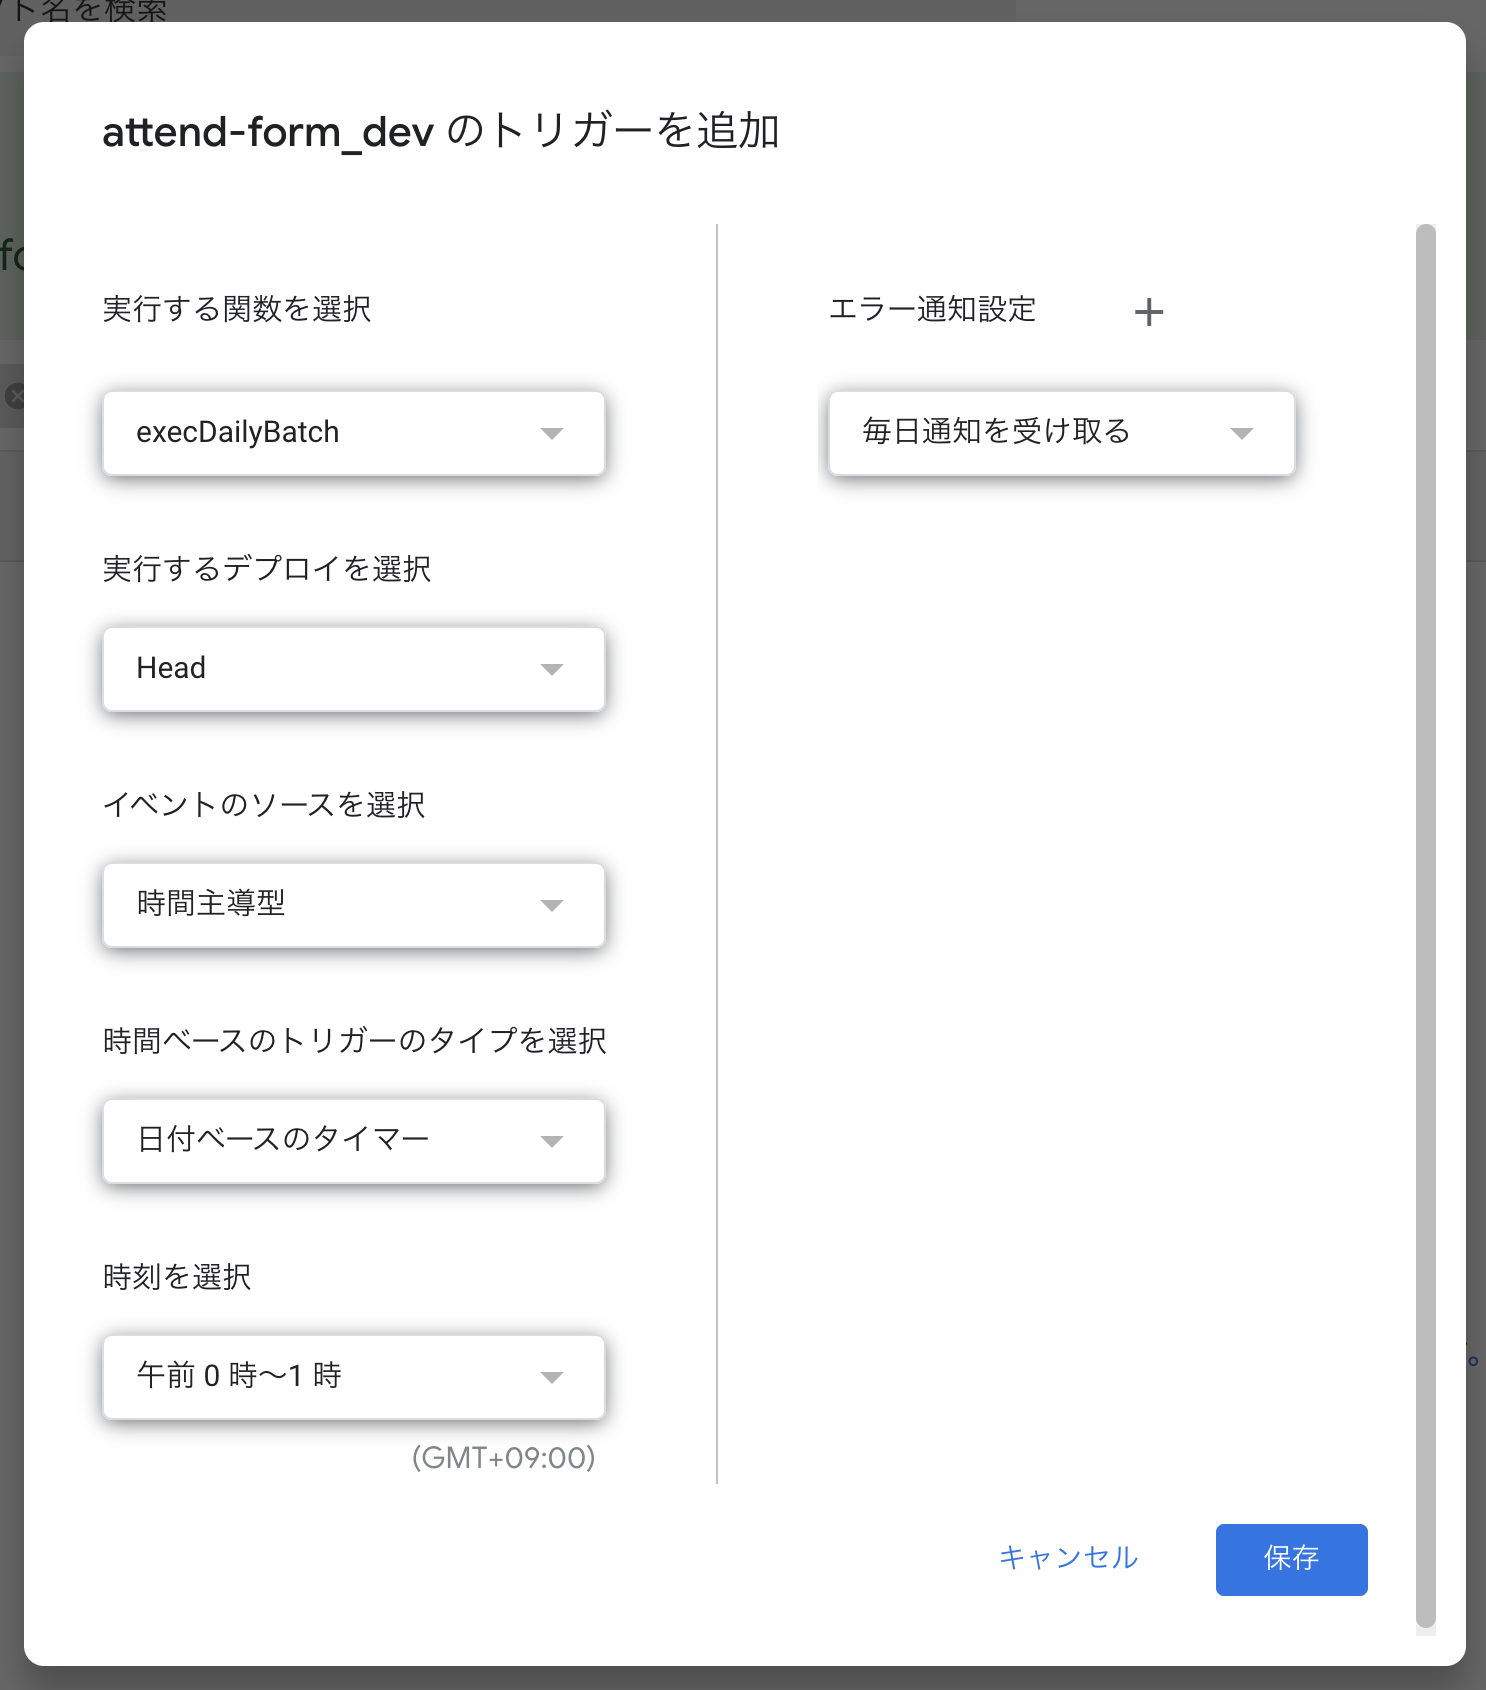 attend-form_07_2.png